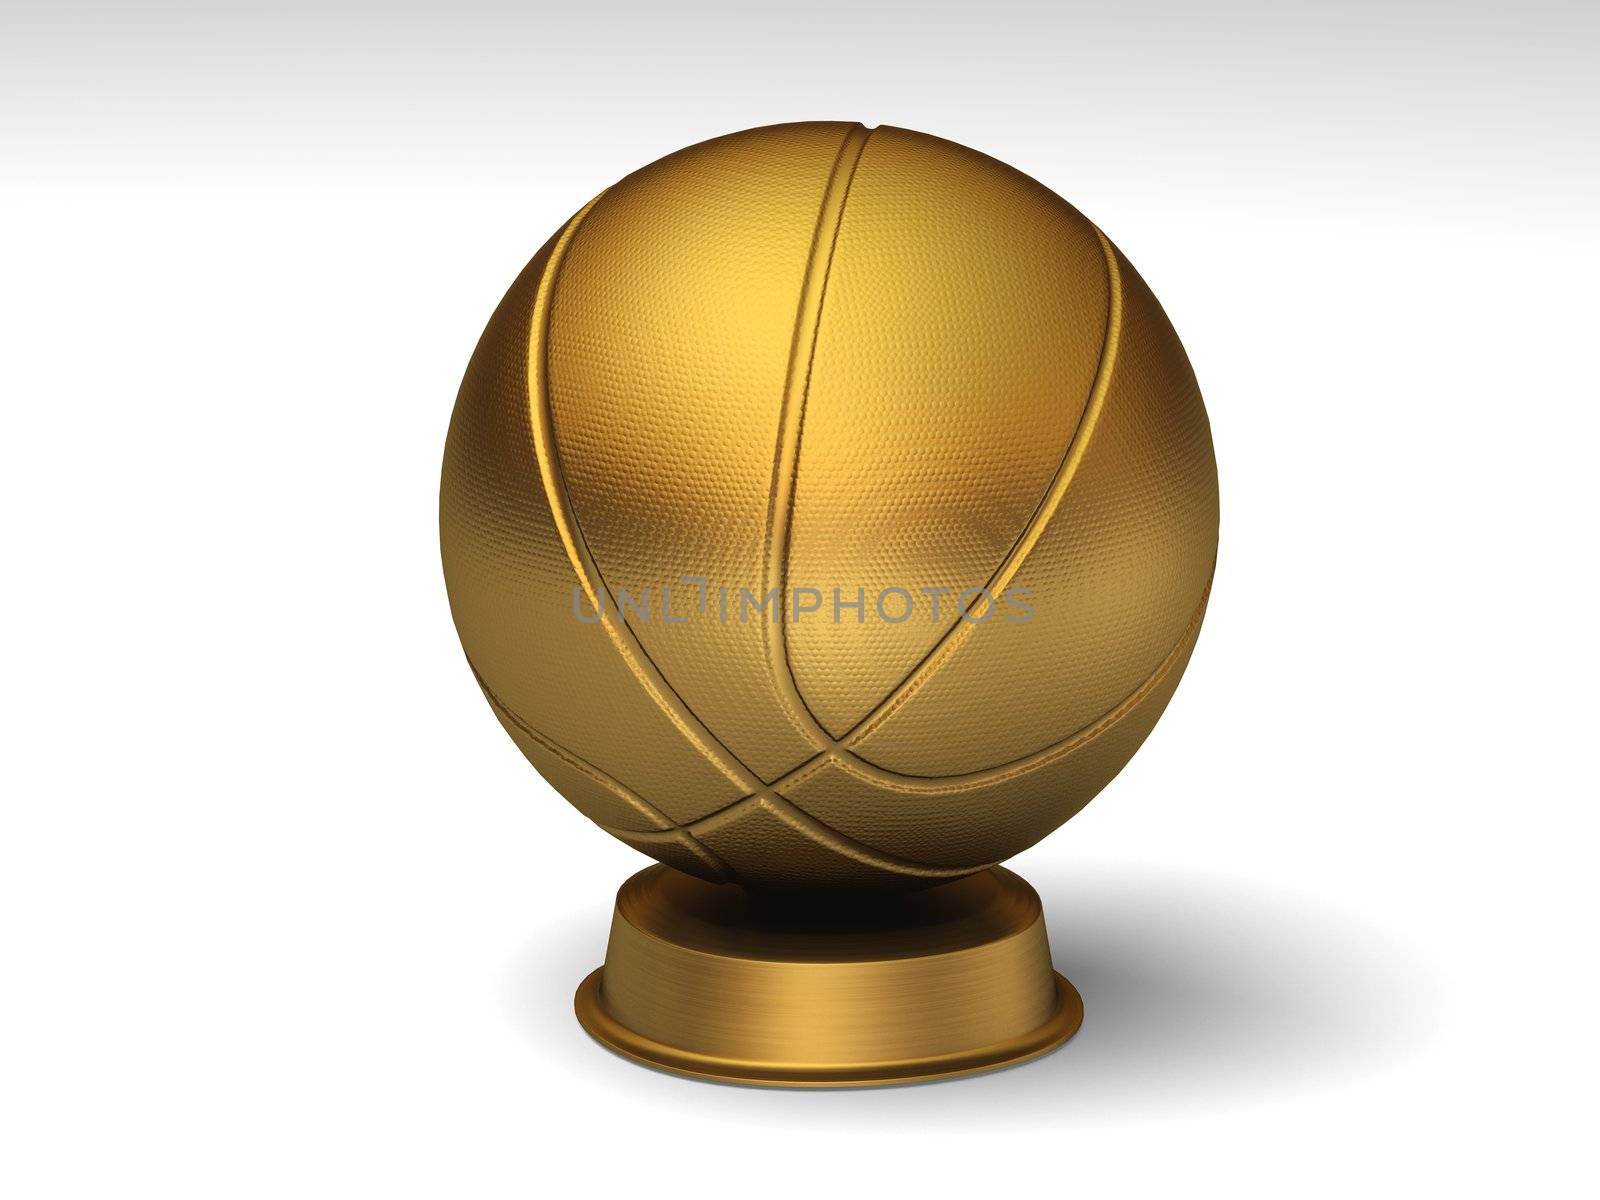 Golden basketball trophy by shkyo30